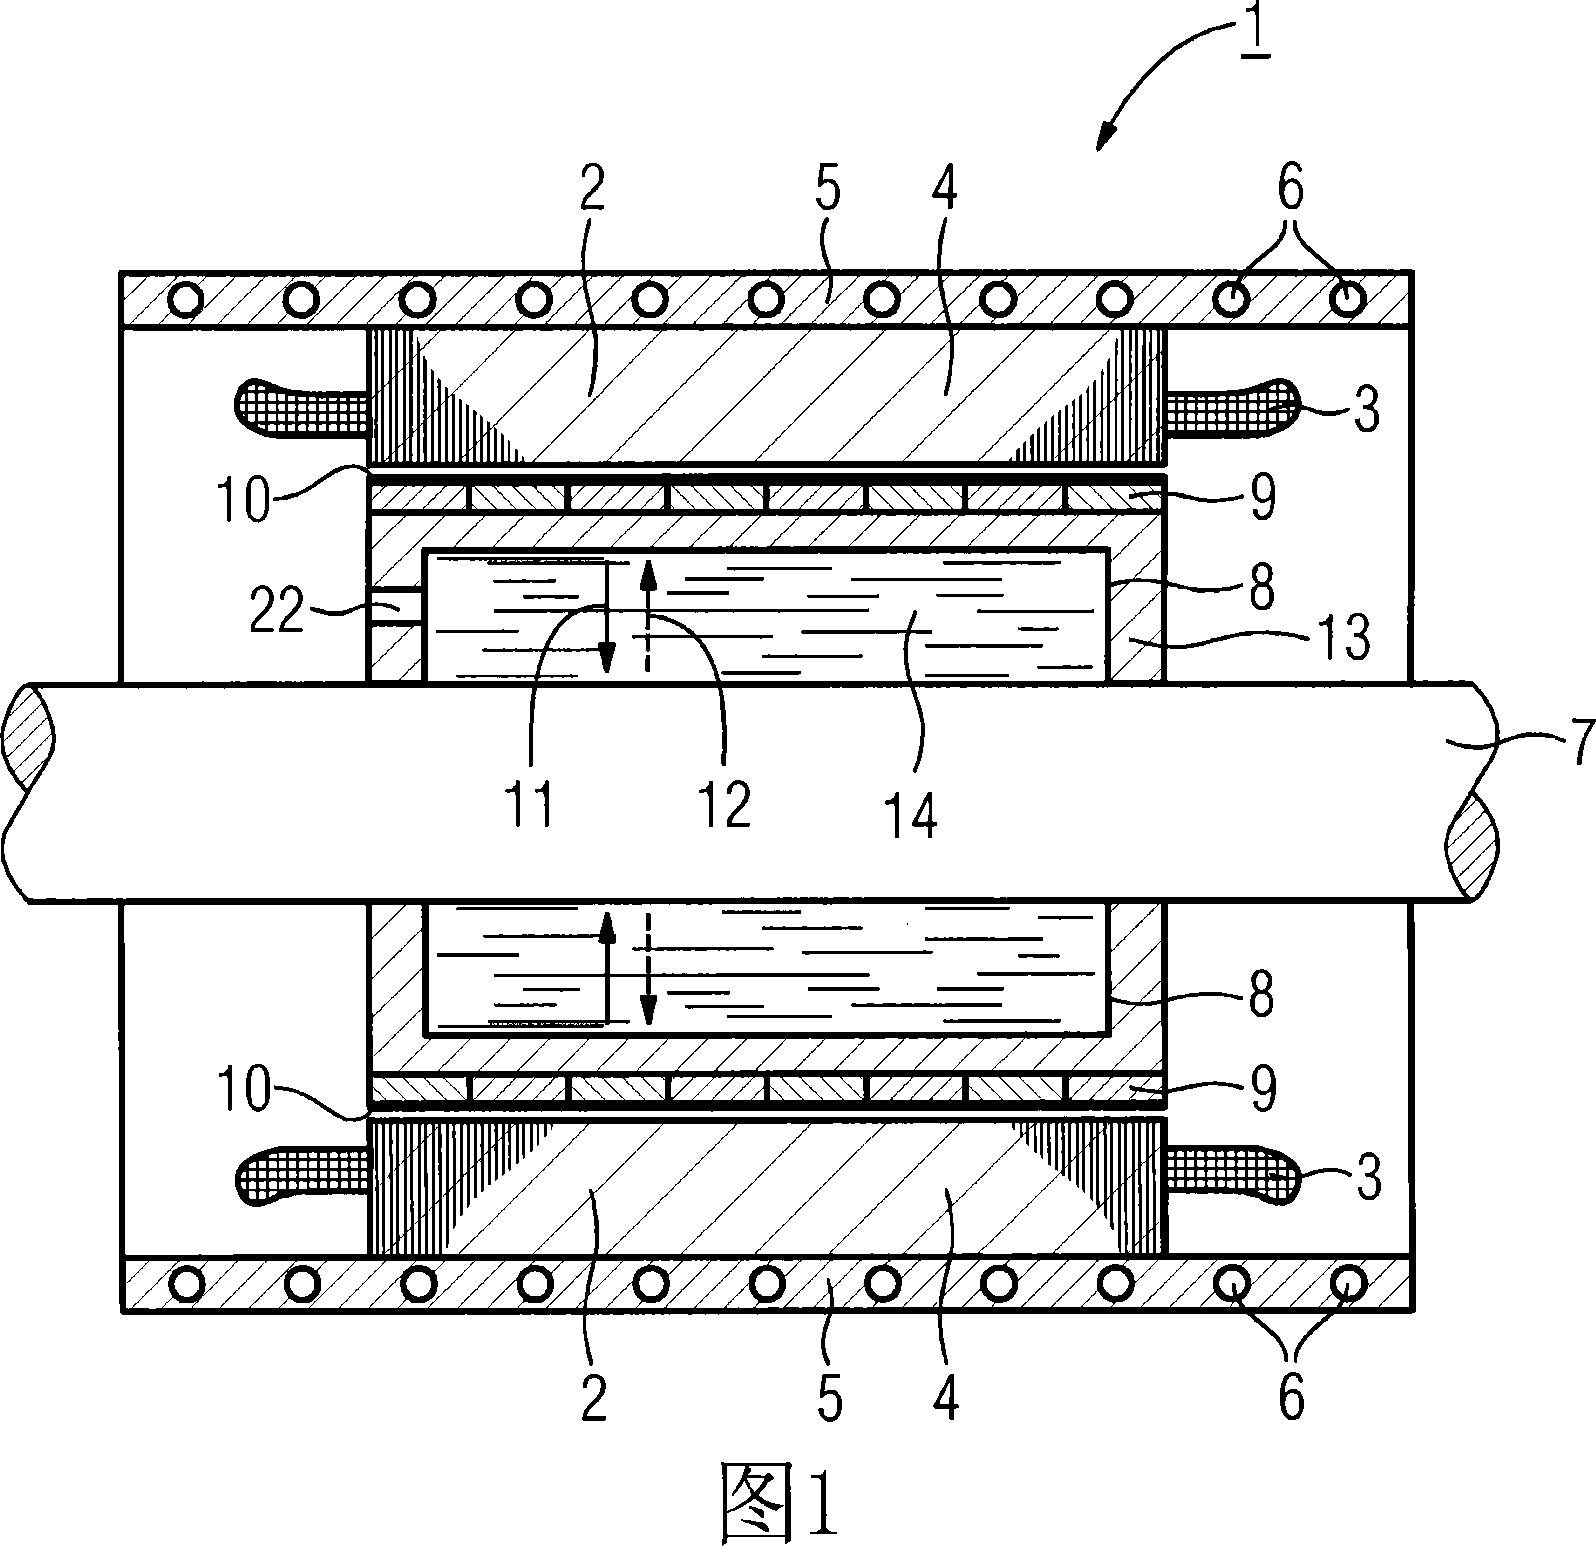 Electric motor with permanent magnet excitation and rotor cooling